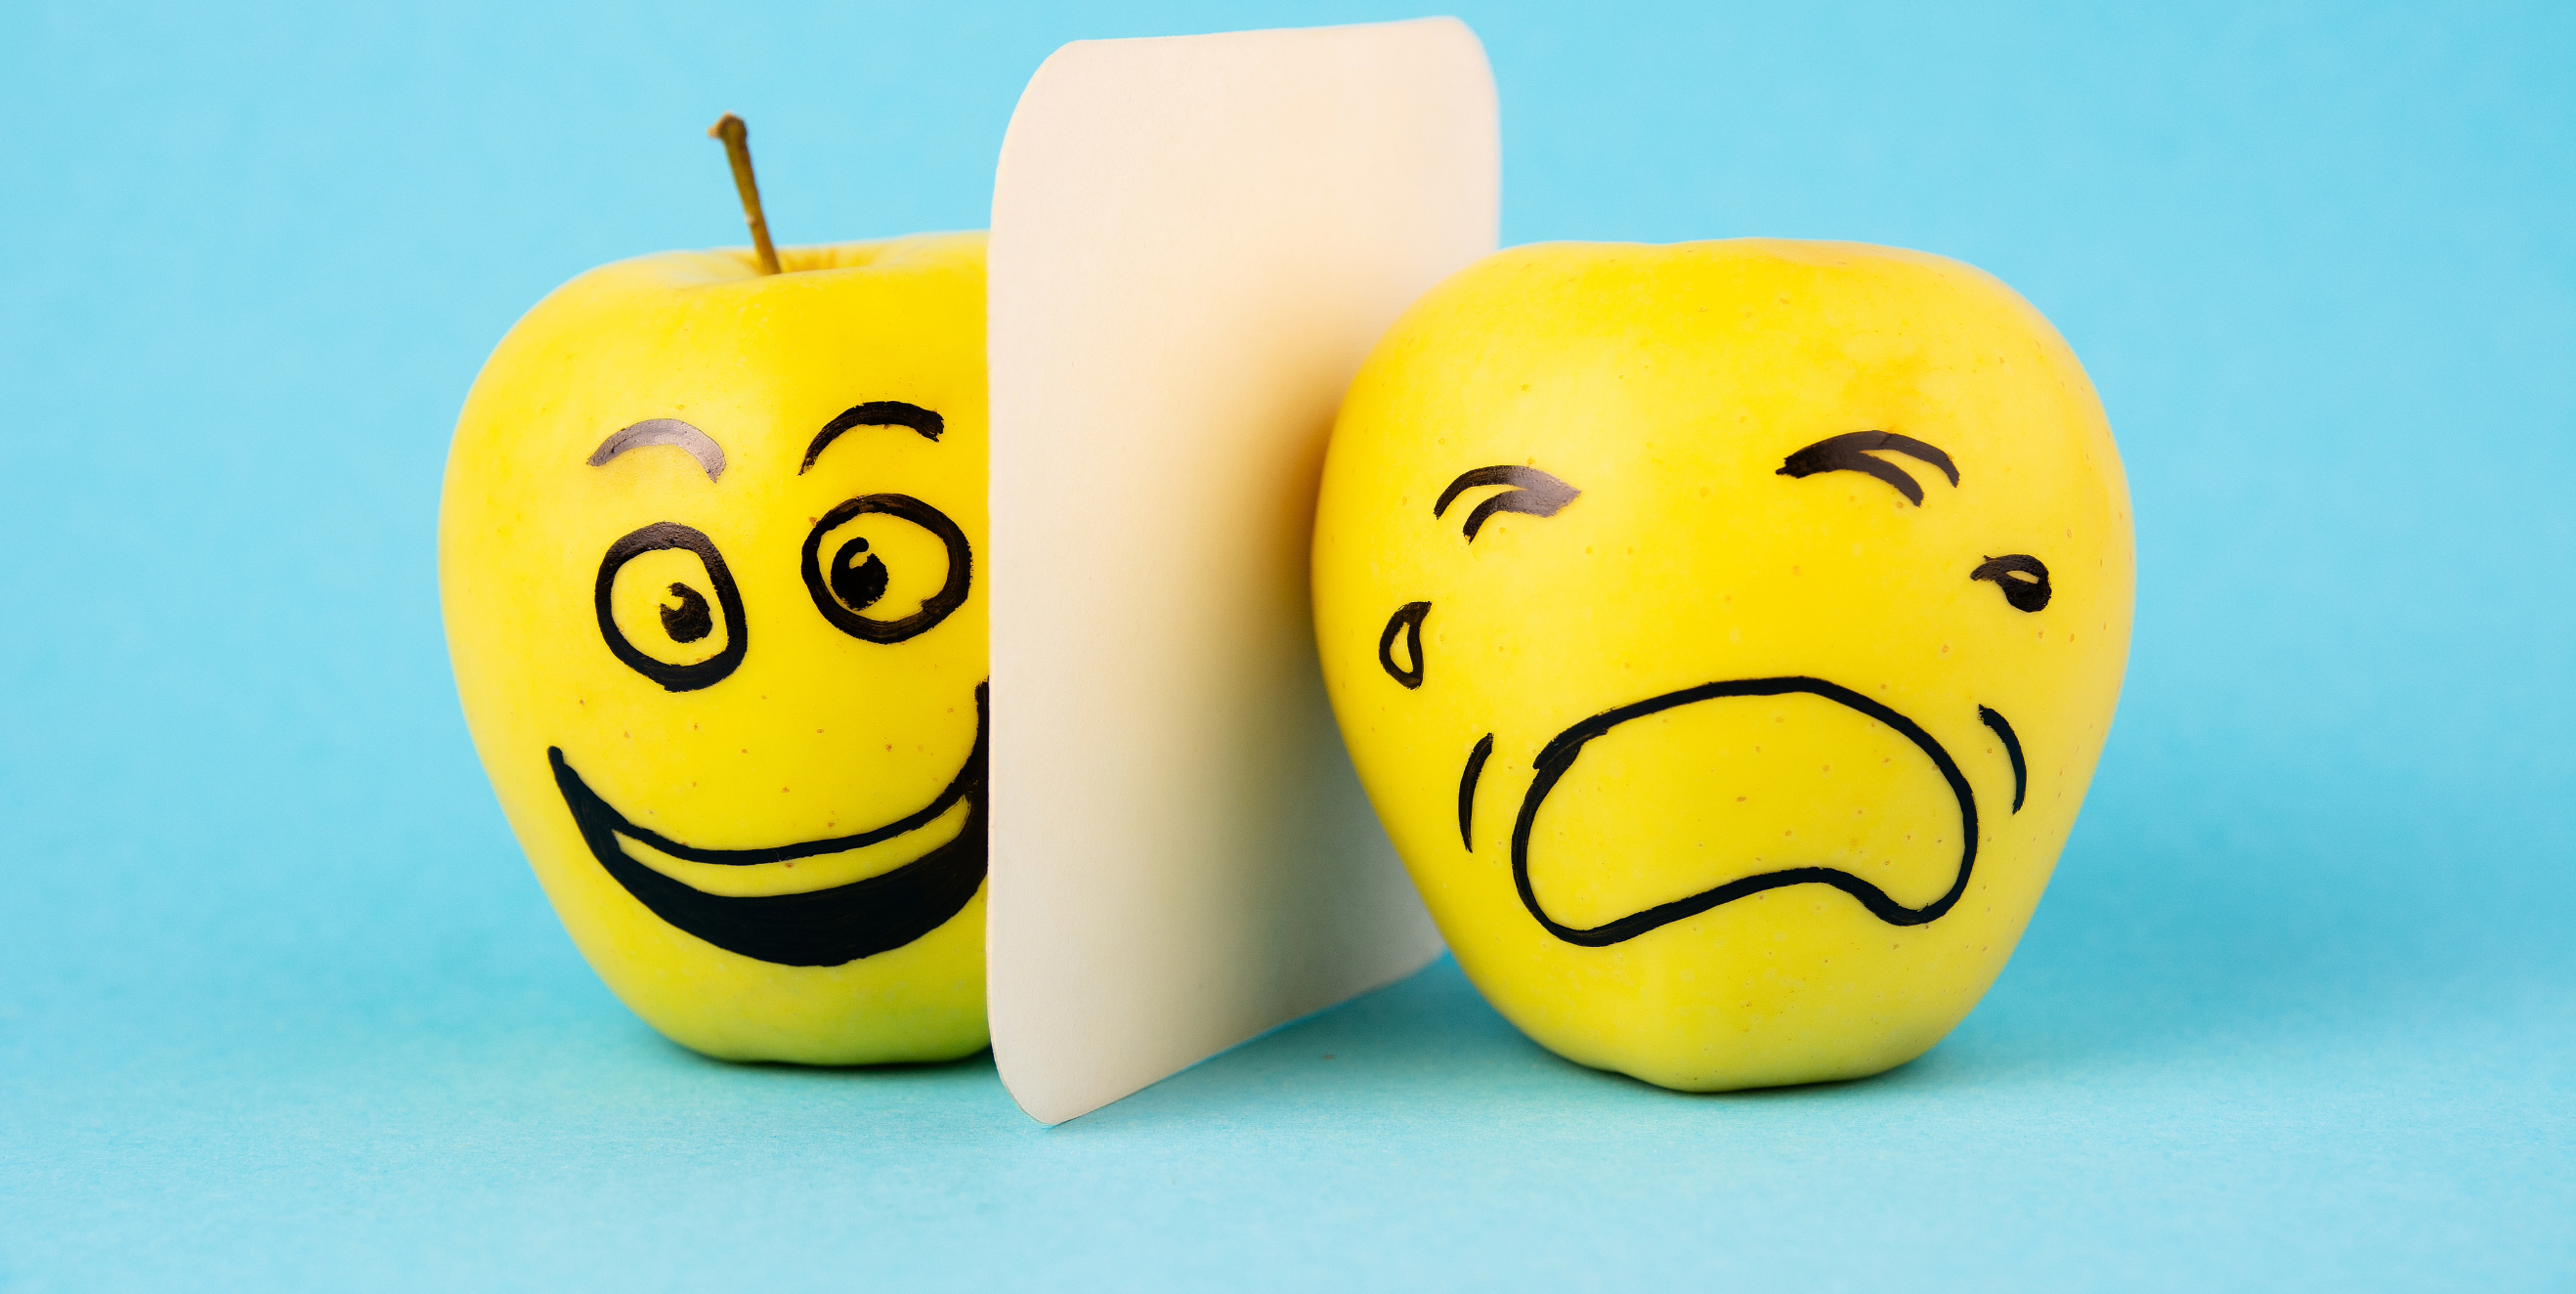 A happy apple and a sad apple showing there is always joy in oy.